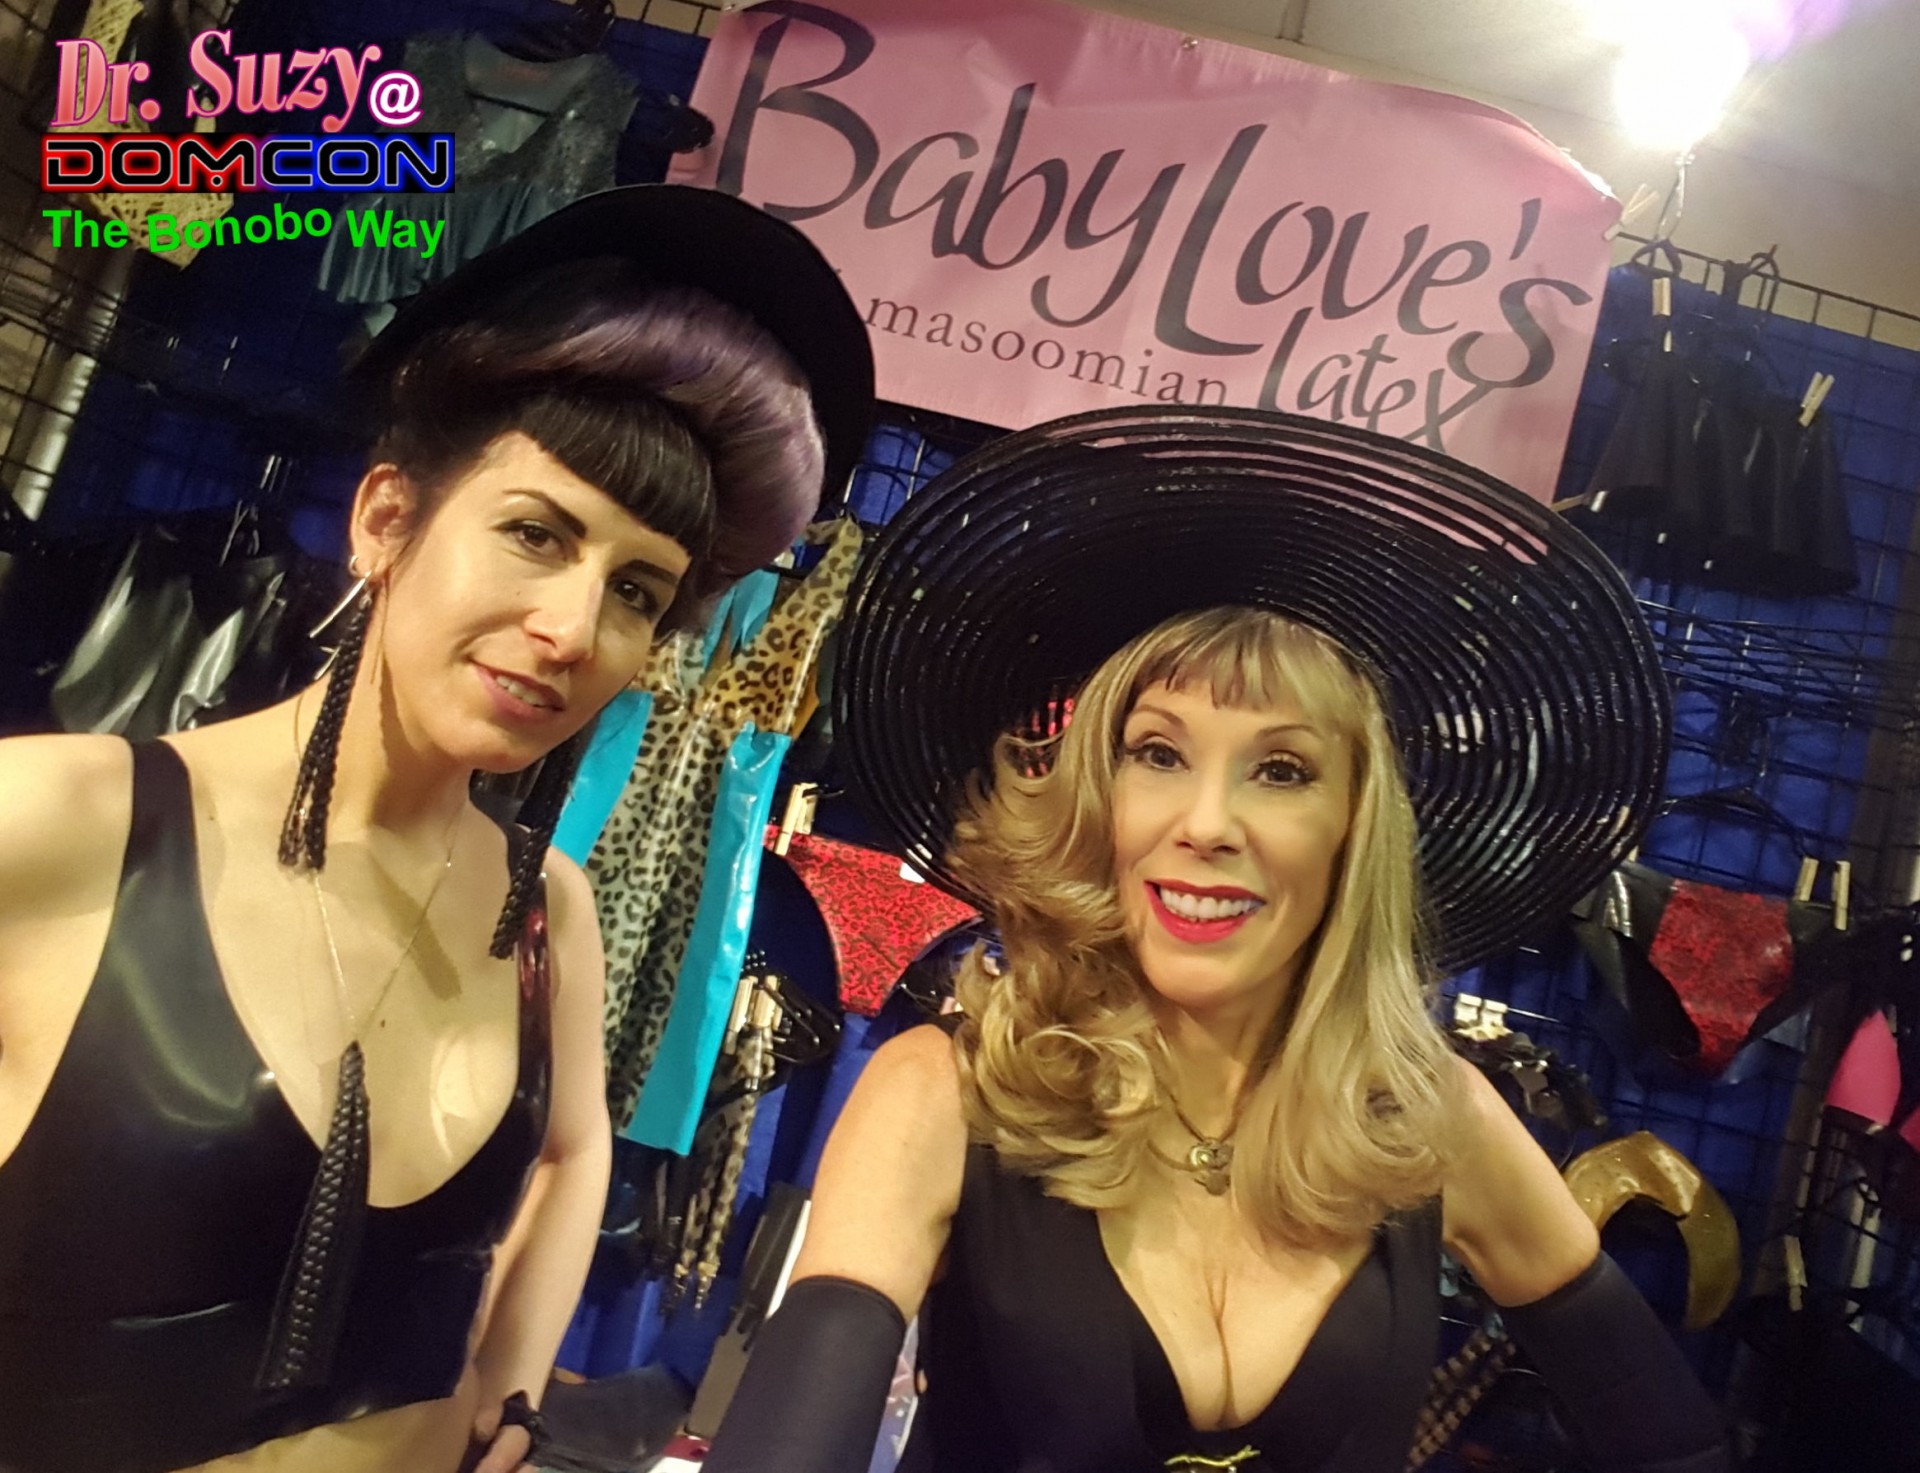 With Reneé Massoumian & my DomCon leopard latex Opening Night dress hanging behind us.